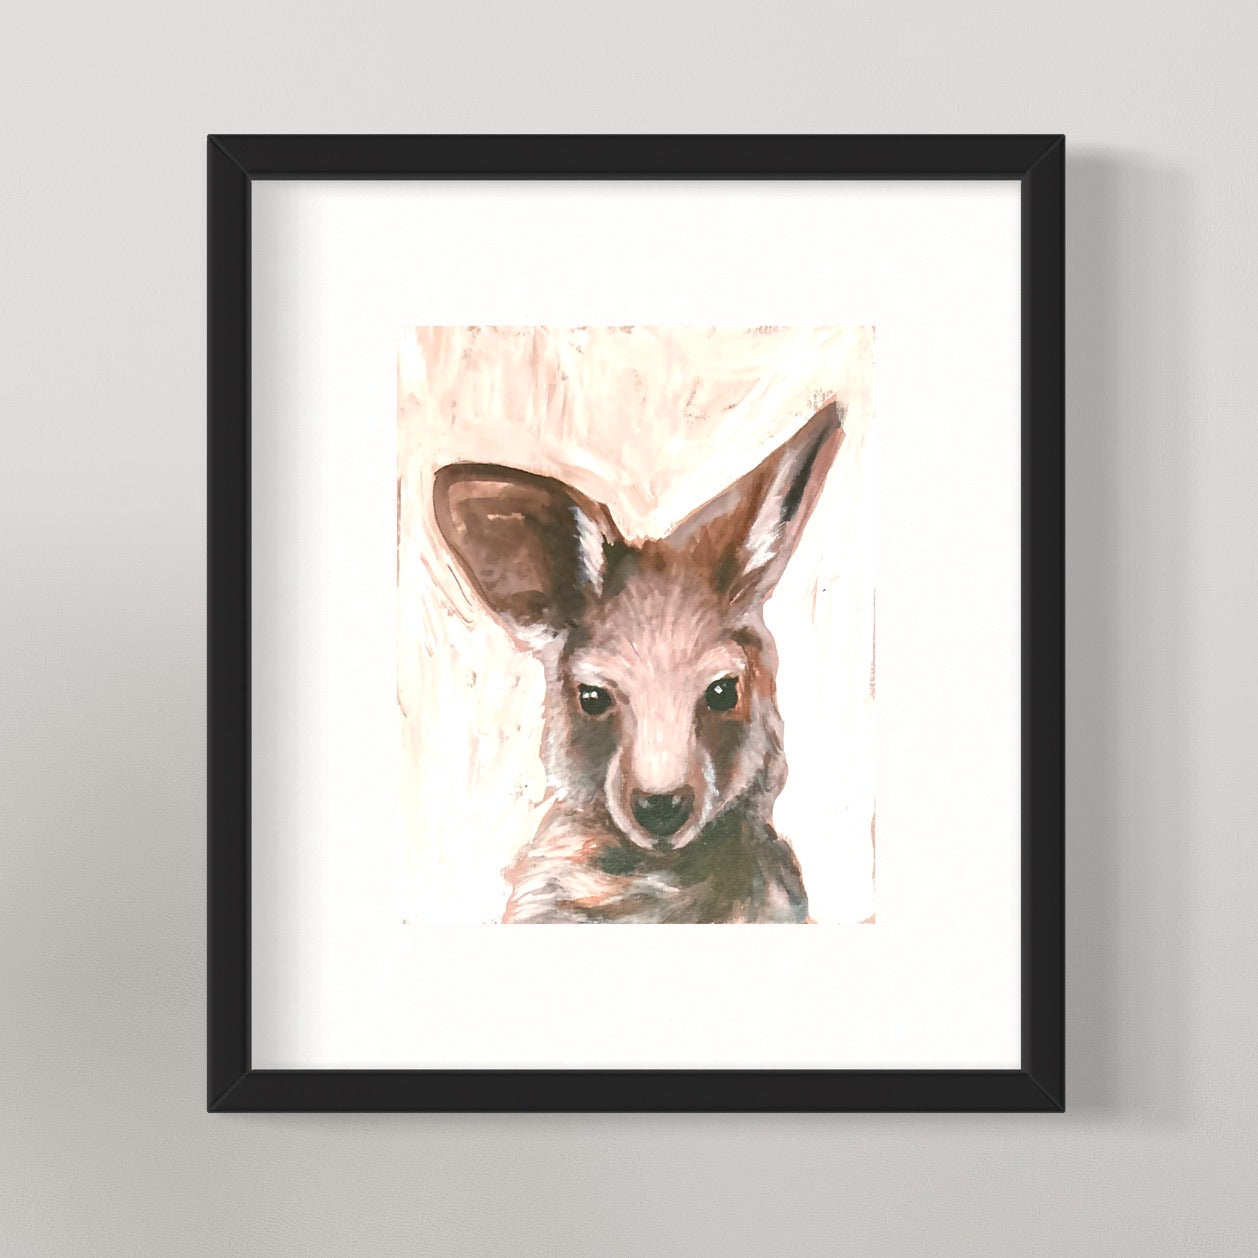 Framed canvas of baby kangaroo painting.